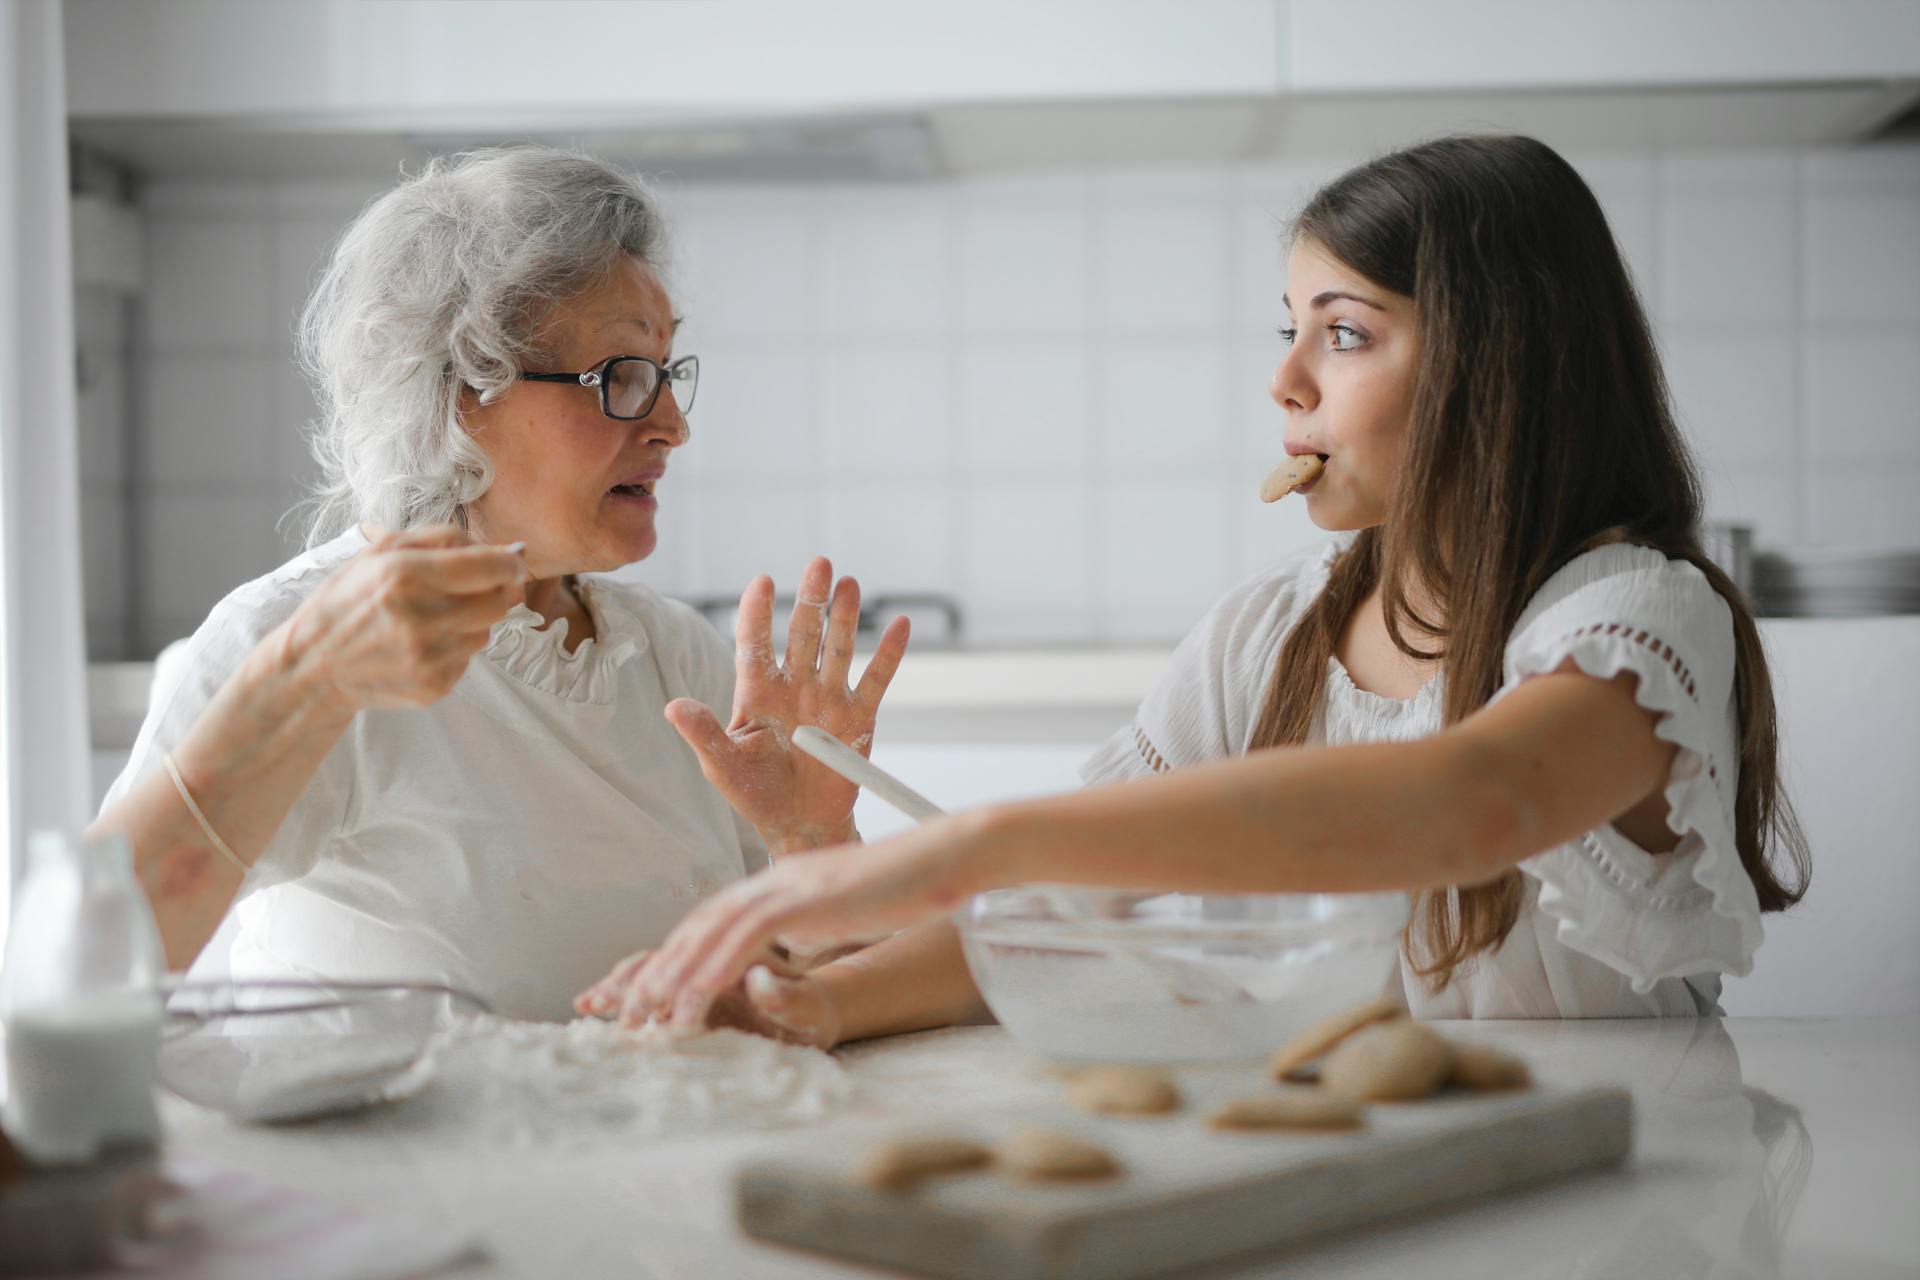 An older woman and a teenage girl sit in a clean, white kitchen. The teenager has a cookie in her mouth and is reaching for something unseen on the counter. The older woman holds her hands up as if in conversation with the younger girl.